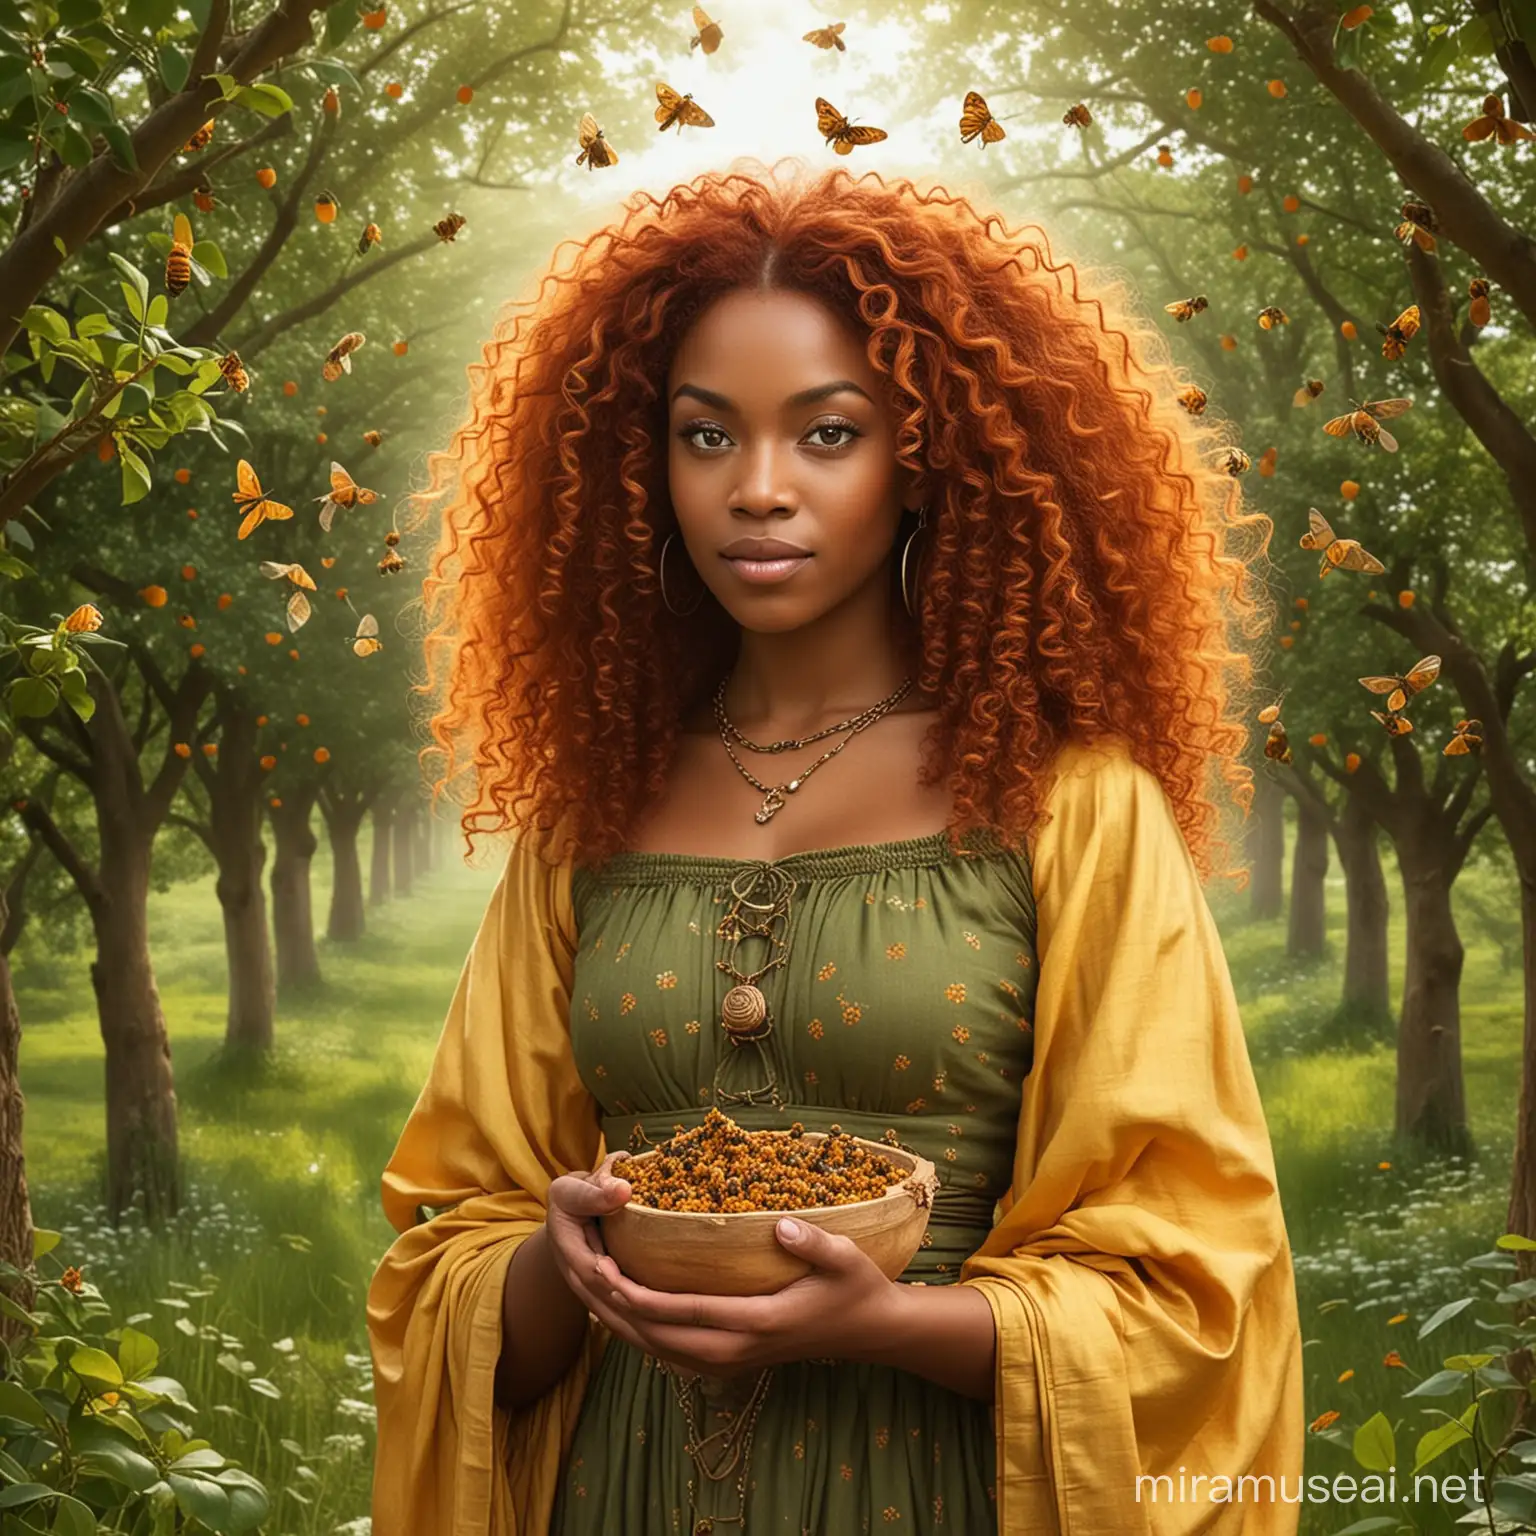 The Celtic bee goddess Brigid held bees to be sacred, with her hives bringing their magical nectar from her Otherworld apple orchard she is Afro-Indigenous with red curly hair 